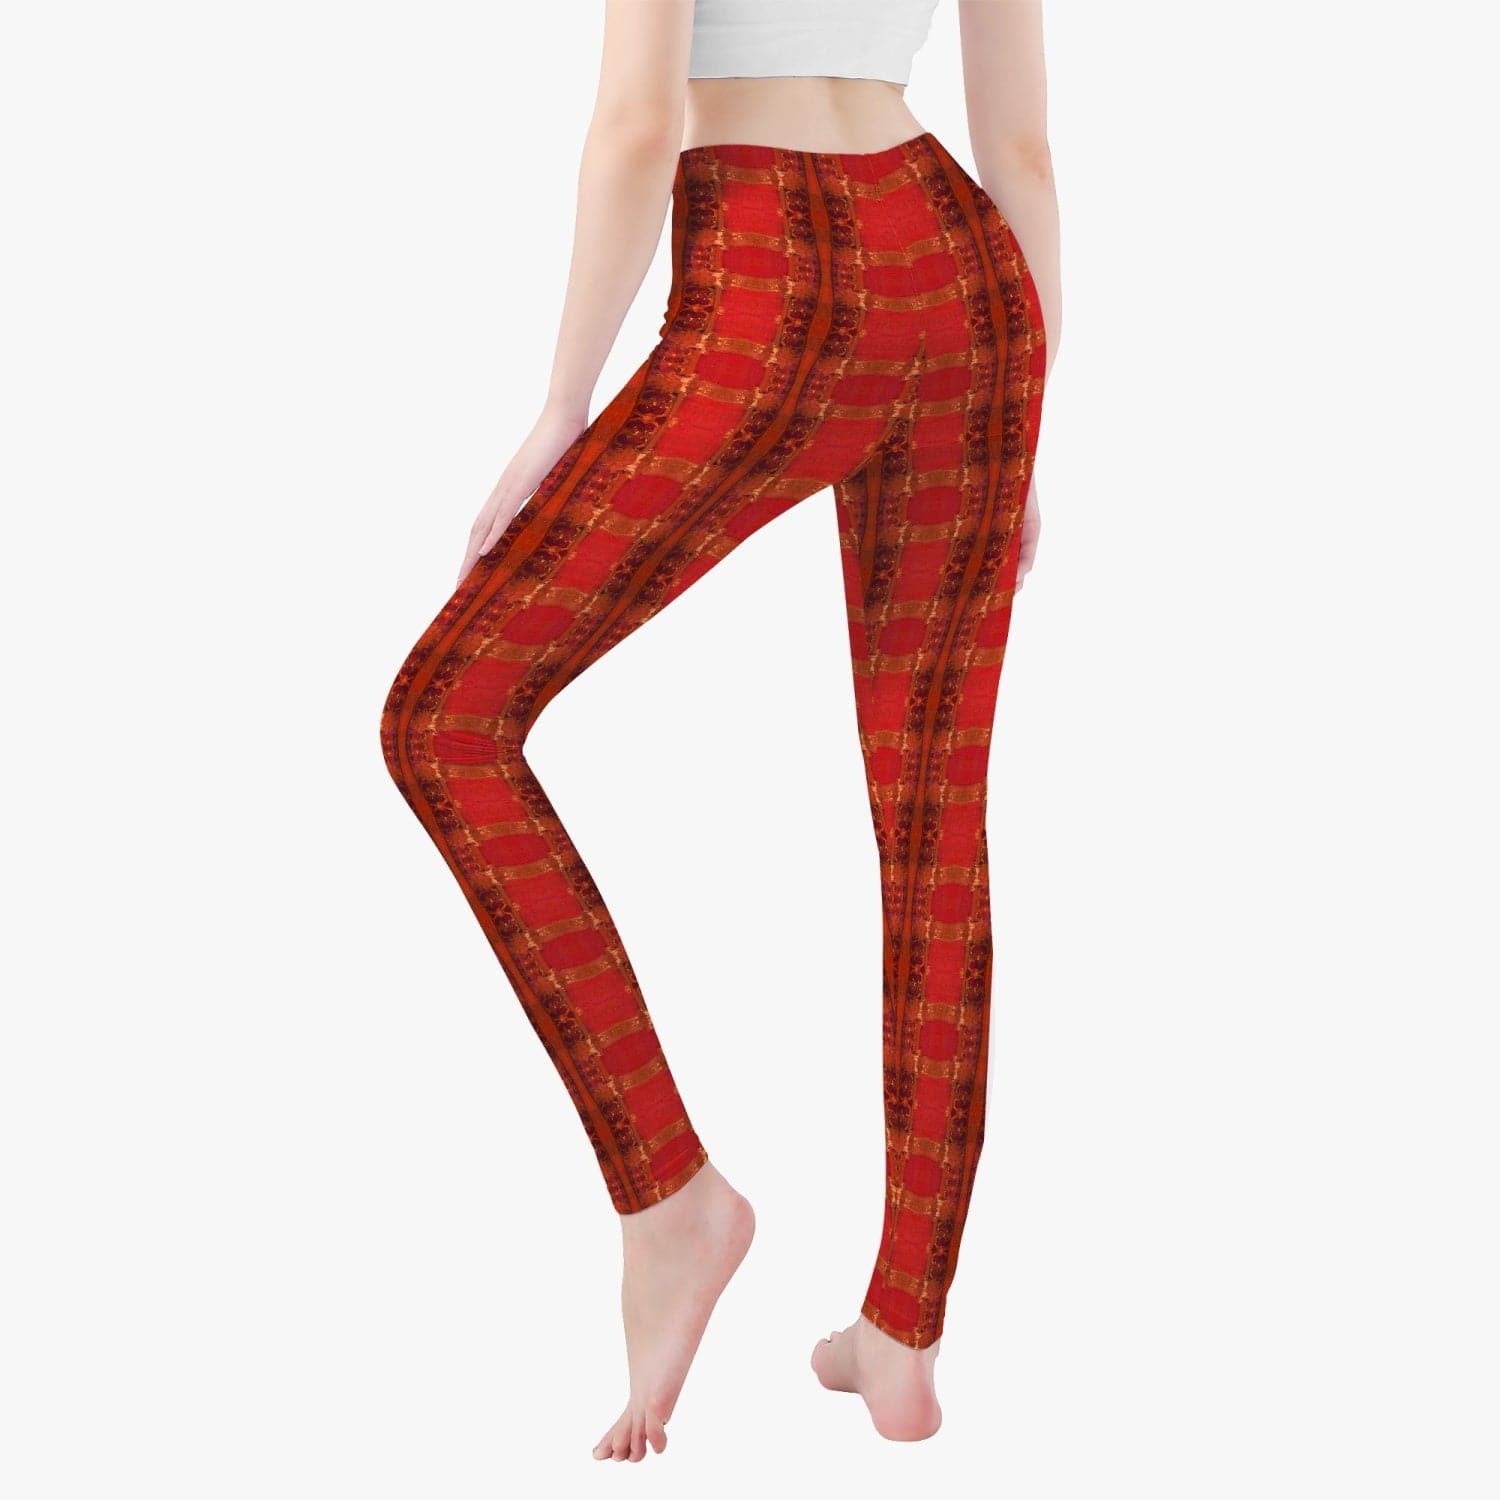 Active Red Yoga Pants for Women by Sensus Design